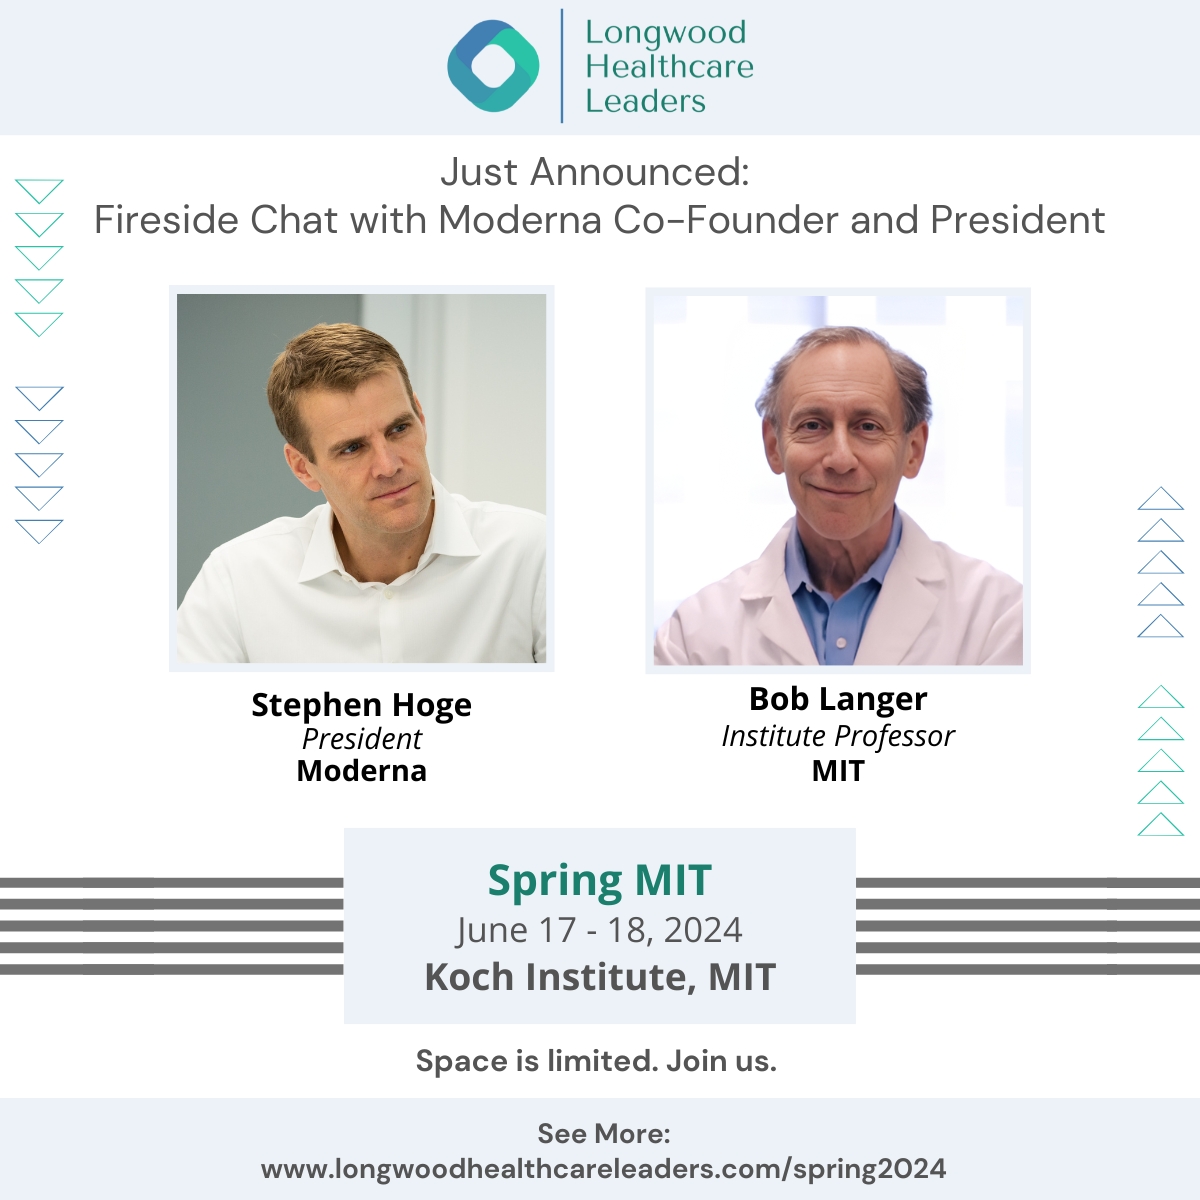 We are thrilled to announce the recent confirmation of @moderna_tx President Stephen Hoge and Scientific Co-Founder Bob Langer @kochinstitute @MIT. Join us for an intimate conversation at @LongwoodFund Spring MIT. longwoodhealthcareleaders.com/spring2024